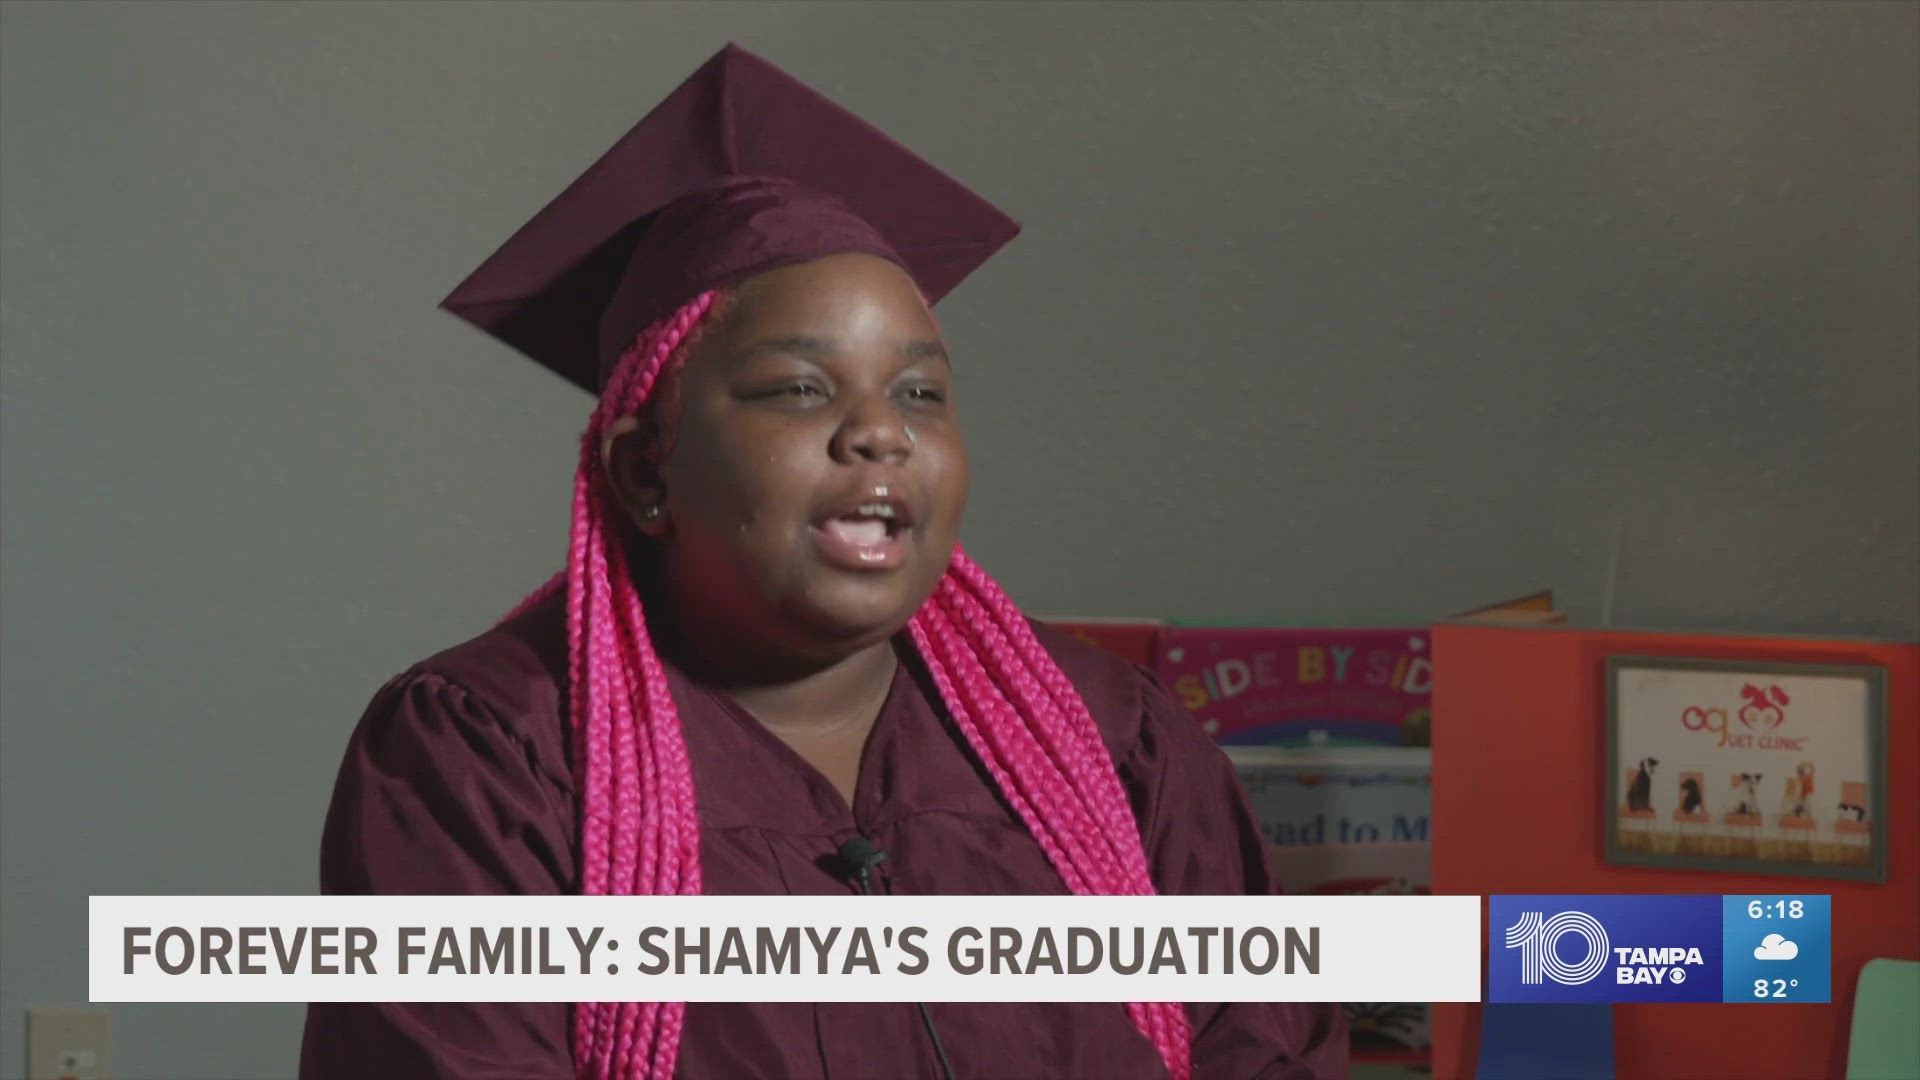 Despite the many challenges Shamya faced in her life, she graduated valedictorian for her class.